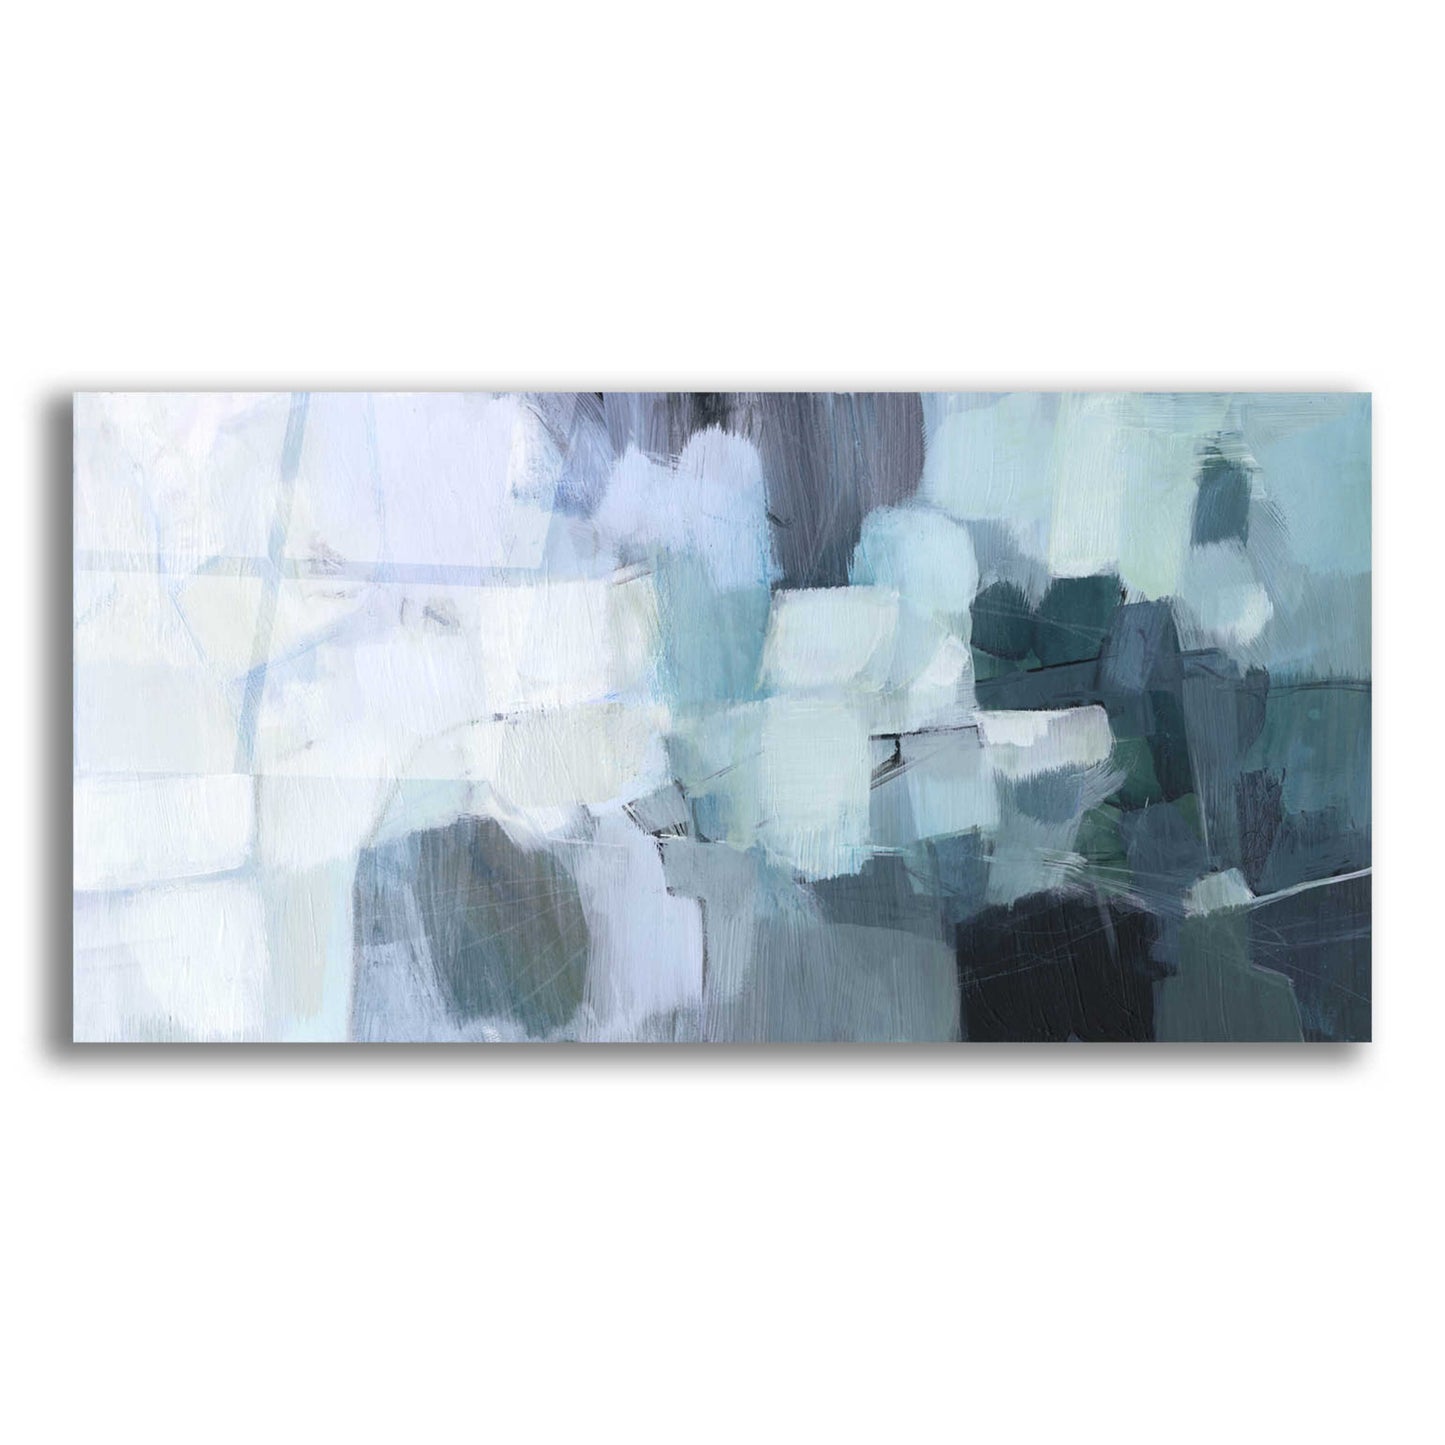 Epic Art 'Blue Deluge II' by Victoria Borges Acrylic Glass Wall Art,24x12